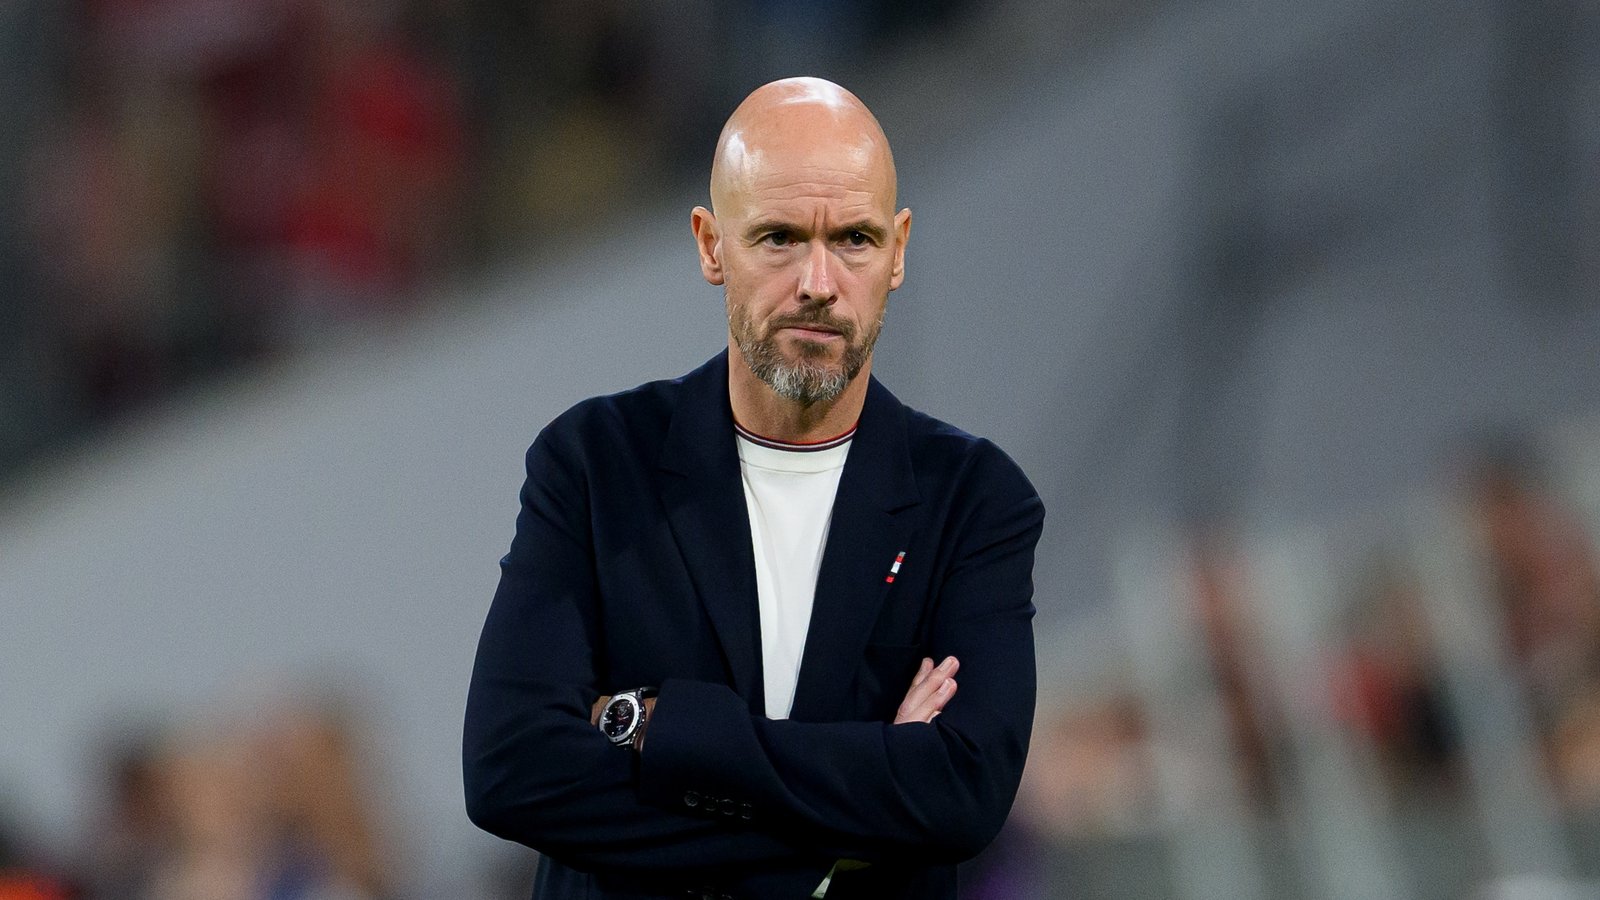 Ten Hag: When you're in a bad place you have to fight